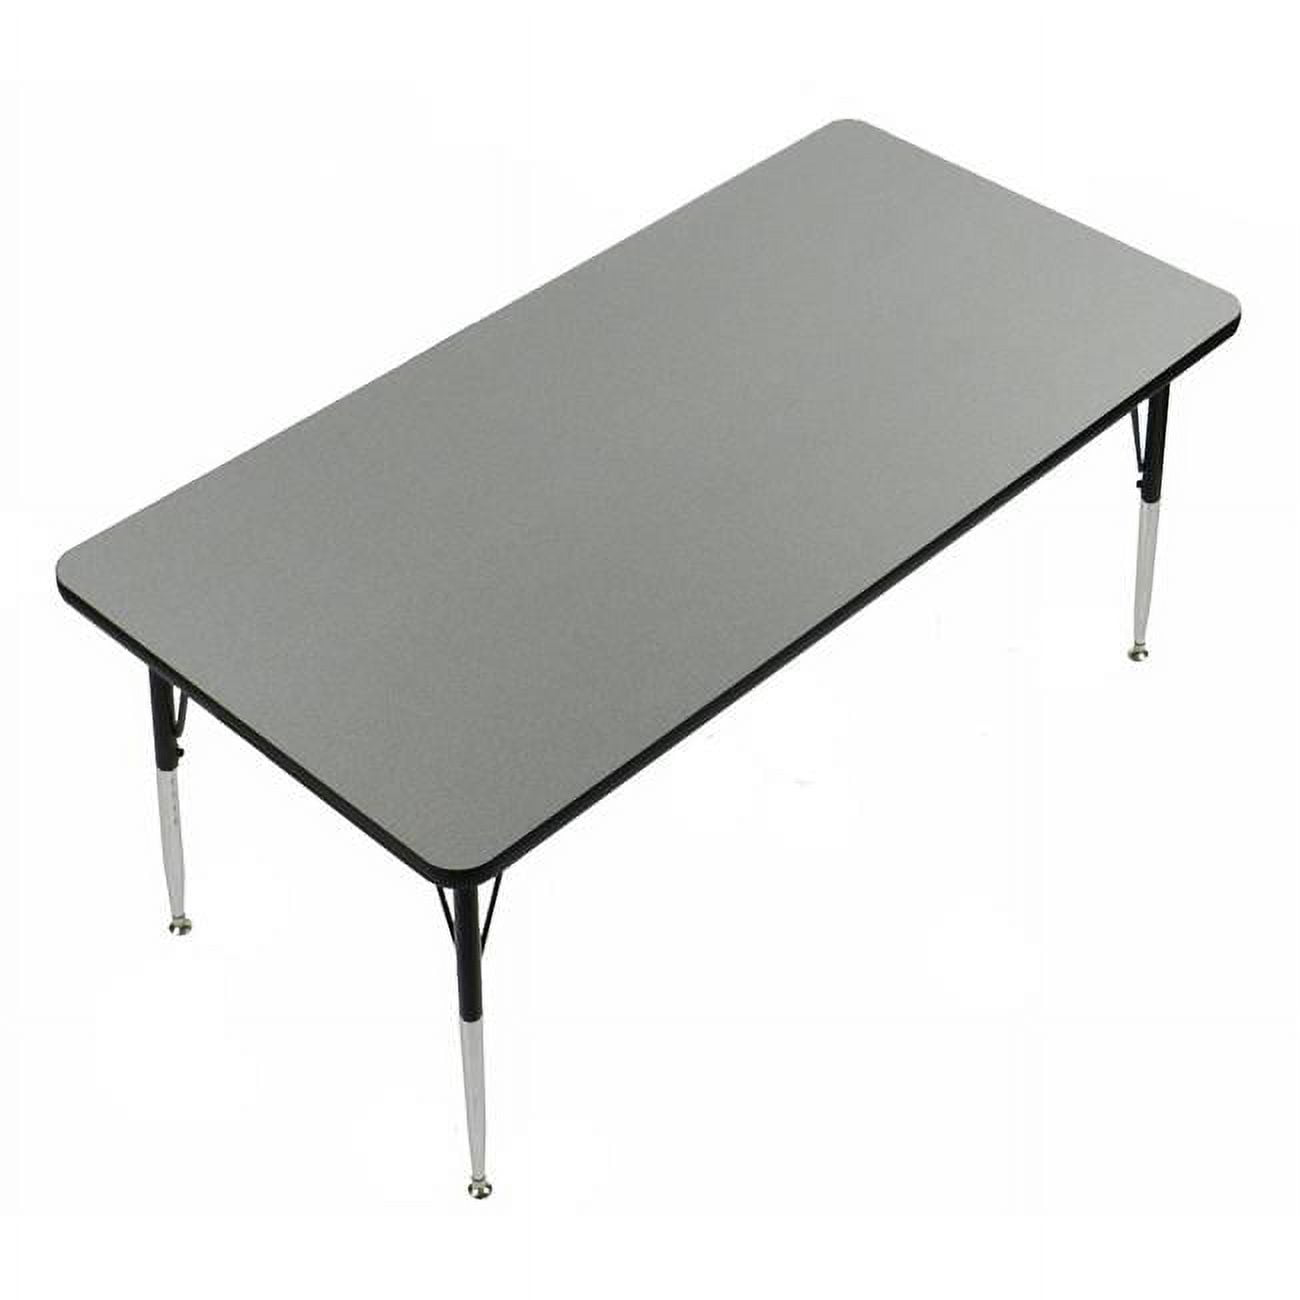 Picture of Correll A3060-TRP-55 1.25 in. High Pressure Top Trapezoid Activity Tables, Montana Granite - 30 x 60 in.